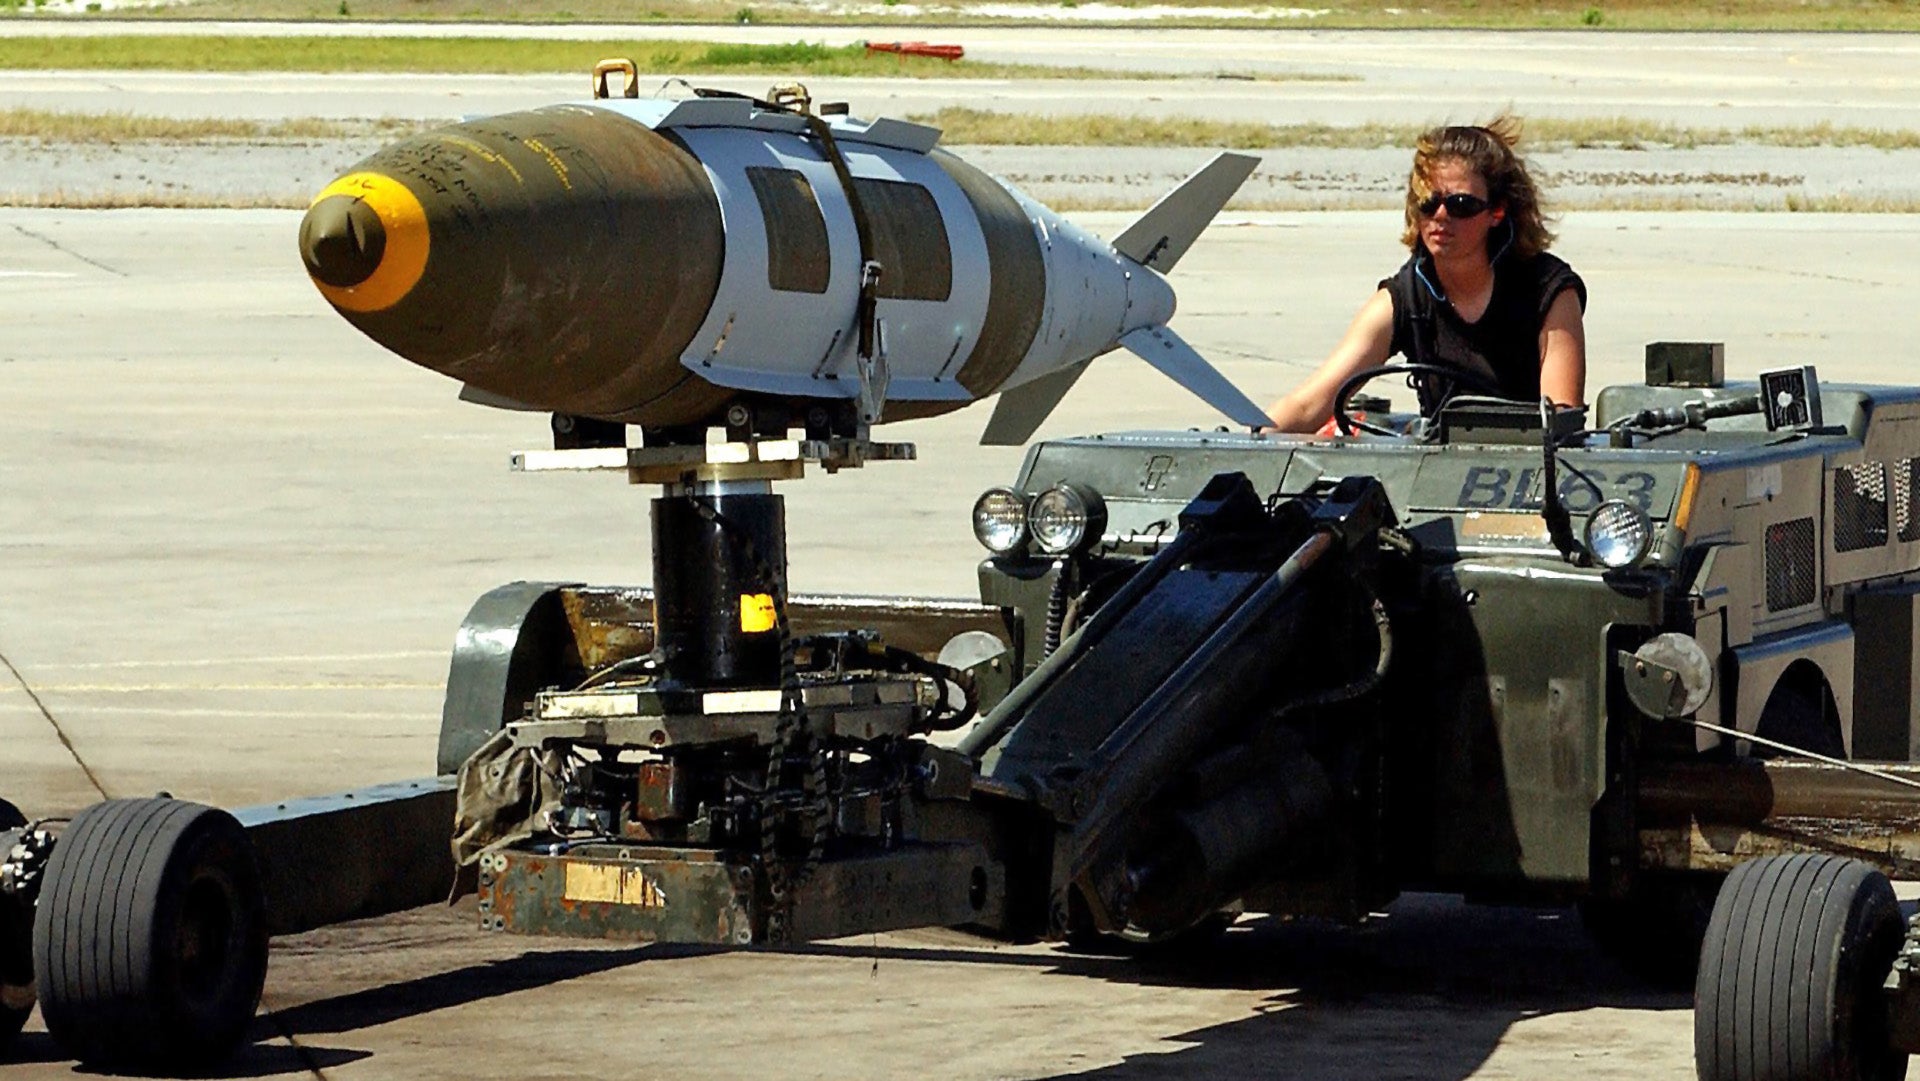 An Air Force load crewmember from the 28th Air Expeditionary Wing, maneuvers an MHU-83 C/E Munitions Loader with a 2,000-pound Joint Direct Attack Munition (JDAM) based on a Mk-84 bomb to be loaded on a B-1B Lancer during Operation ENDURING FREEDOM. Air Force B-2 Spirit, B-1 Lancer, and B-52 Stratofortress, bombers expended more than 80 percent of the tonnage dropped on combat missions over Afghanistan to date.  The Air Force flew more than 600 sorties including strike missions against al Qaeda and Taliban targets in Afghanistan. These targets include early-warning radar systems, ground forces, Command-and-Control facilities, al Qaeda infrastructure, airfields and aircraft. Operation ENDURING FREEDOM is in support of the Global War on Terrorism (GWOT), fighting terrorism abroad.